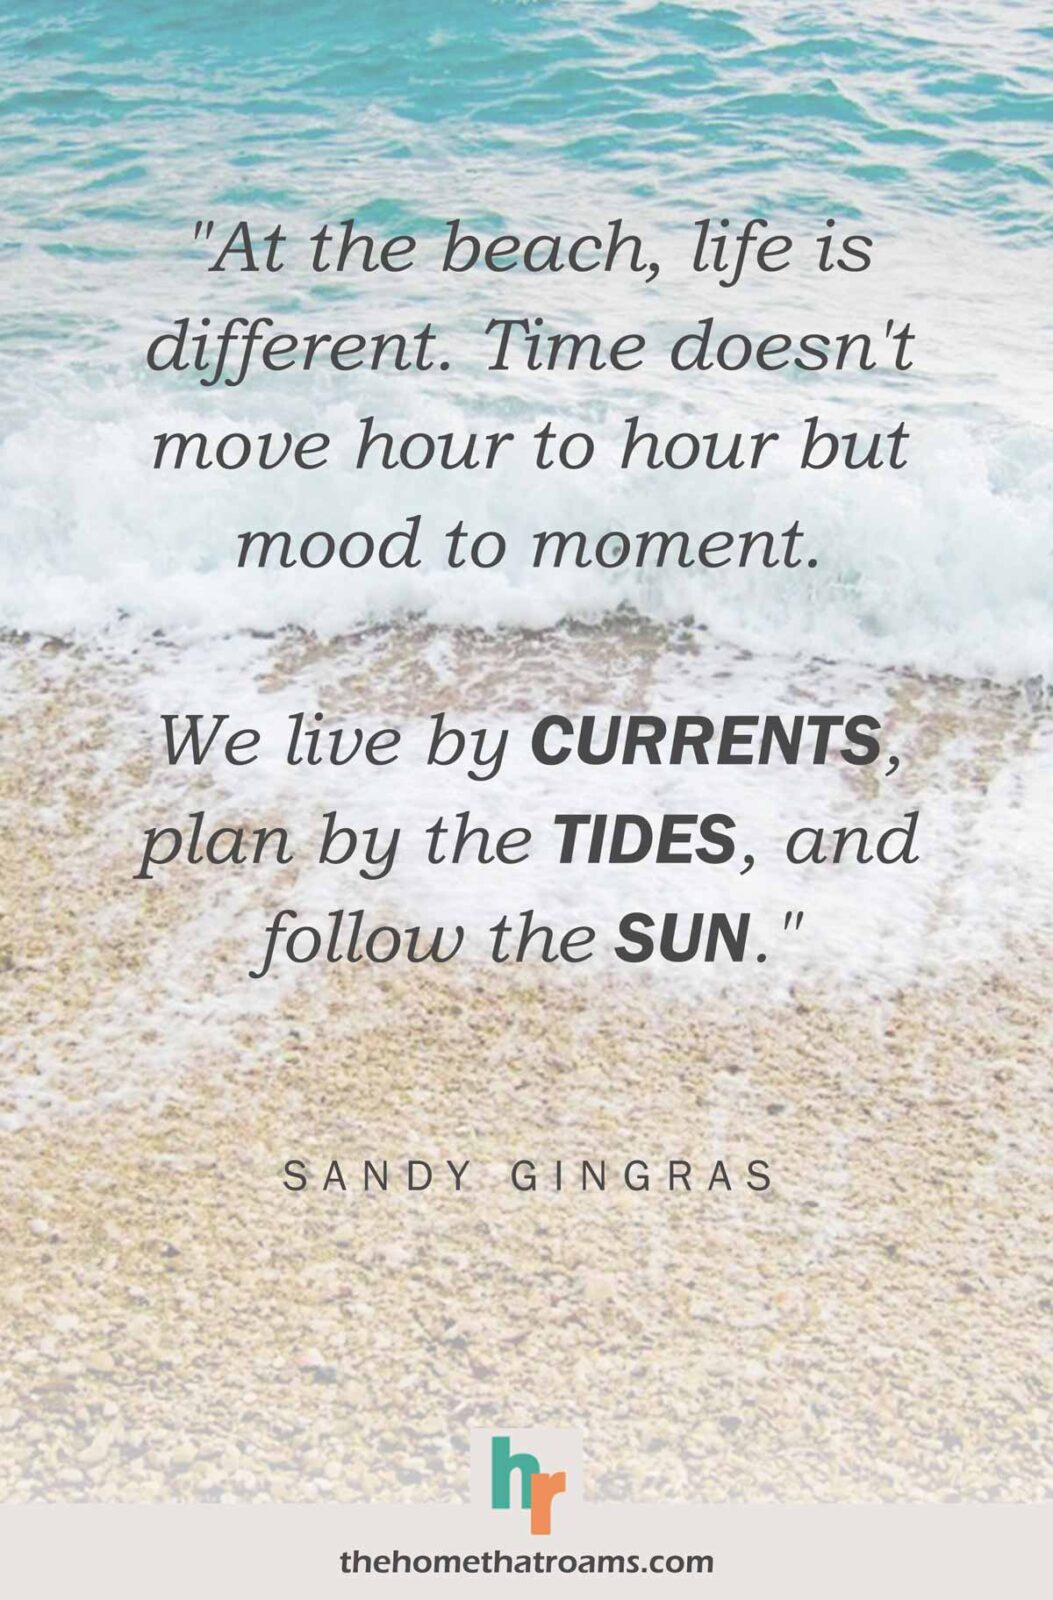 Quote about the ocean, “At the beach, life is different. Time doesn’t move hour to hour but mood to moment. We live by currents, plan by the tides, and follow the sun.” - Sandy Gingras, written on top of a picture of a people beach with a wave crashing on the shore.